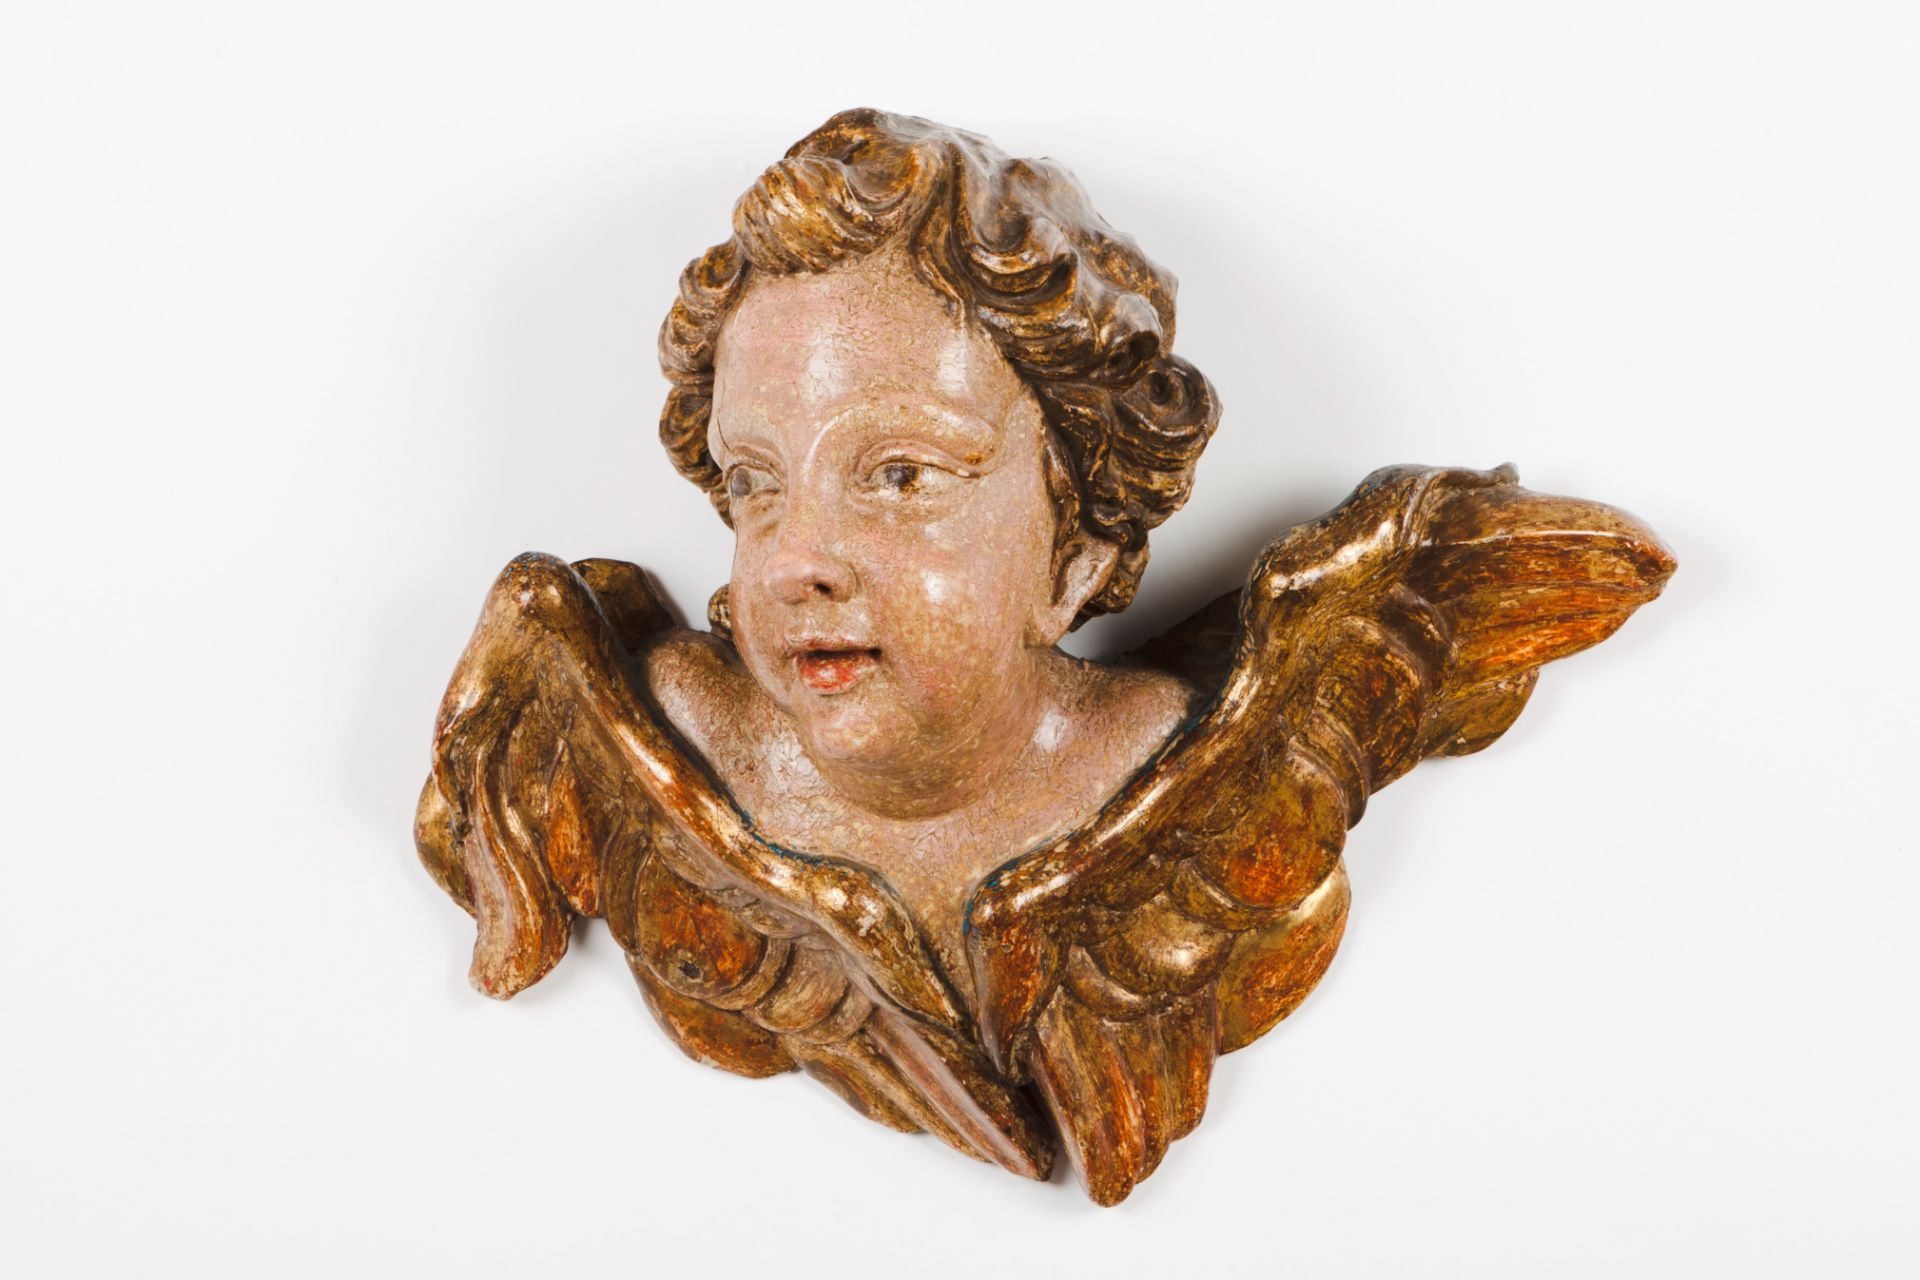 A pair of Angel's headsCarved, gilt and polychrome wooden sculptures Portugal, 18th century ( - Image 2 of 2